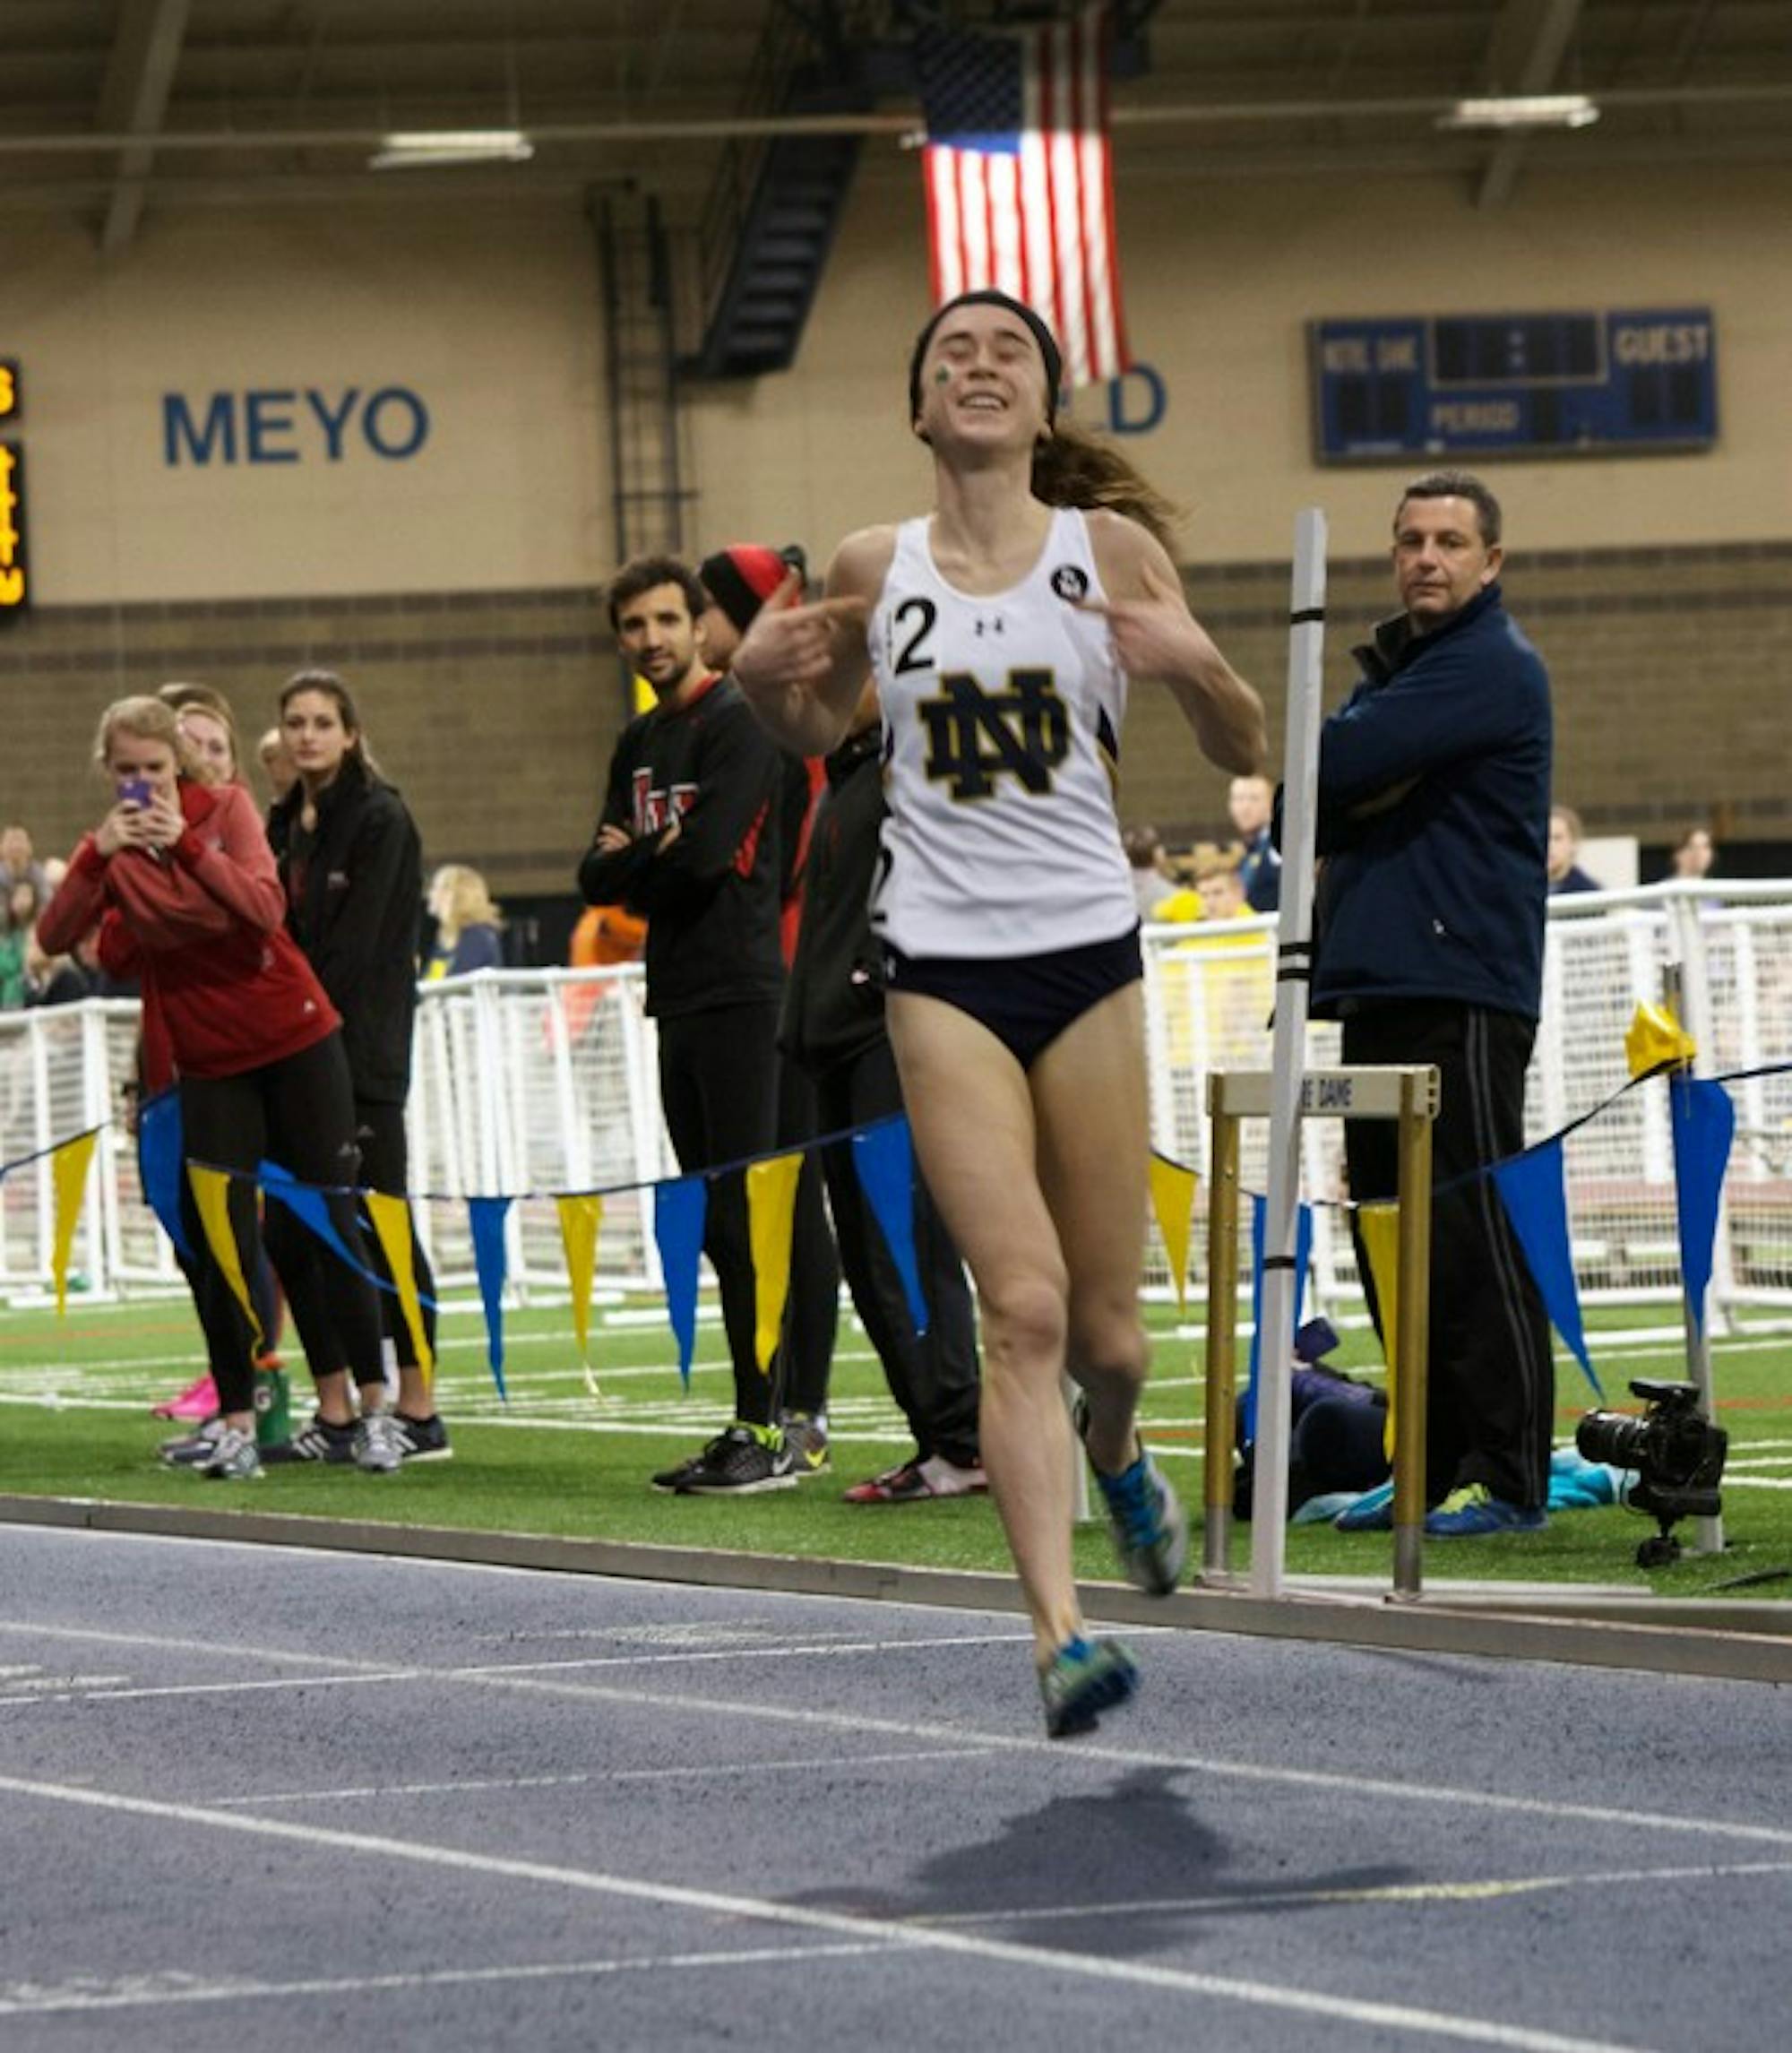 Senior Molly Seidel celebrates after winning the 3,000-meter run and setting a new school record at the Meyo Invitational on Feb. 6.